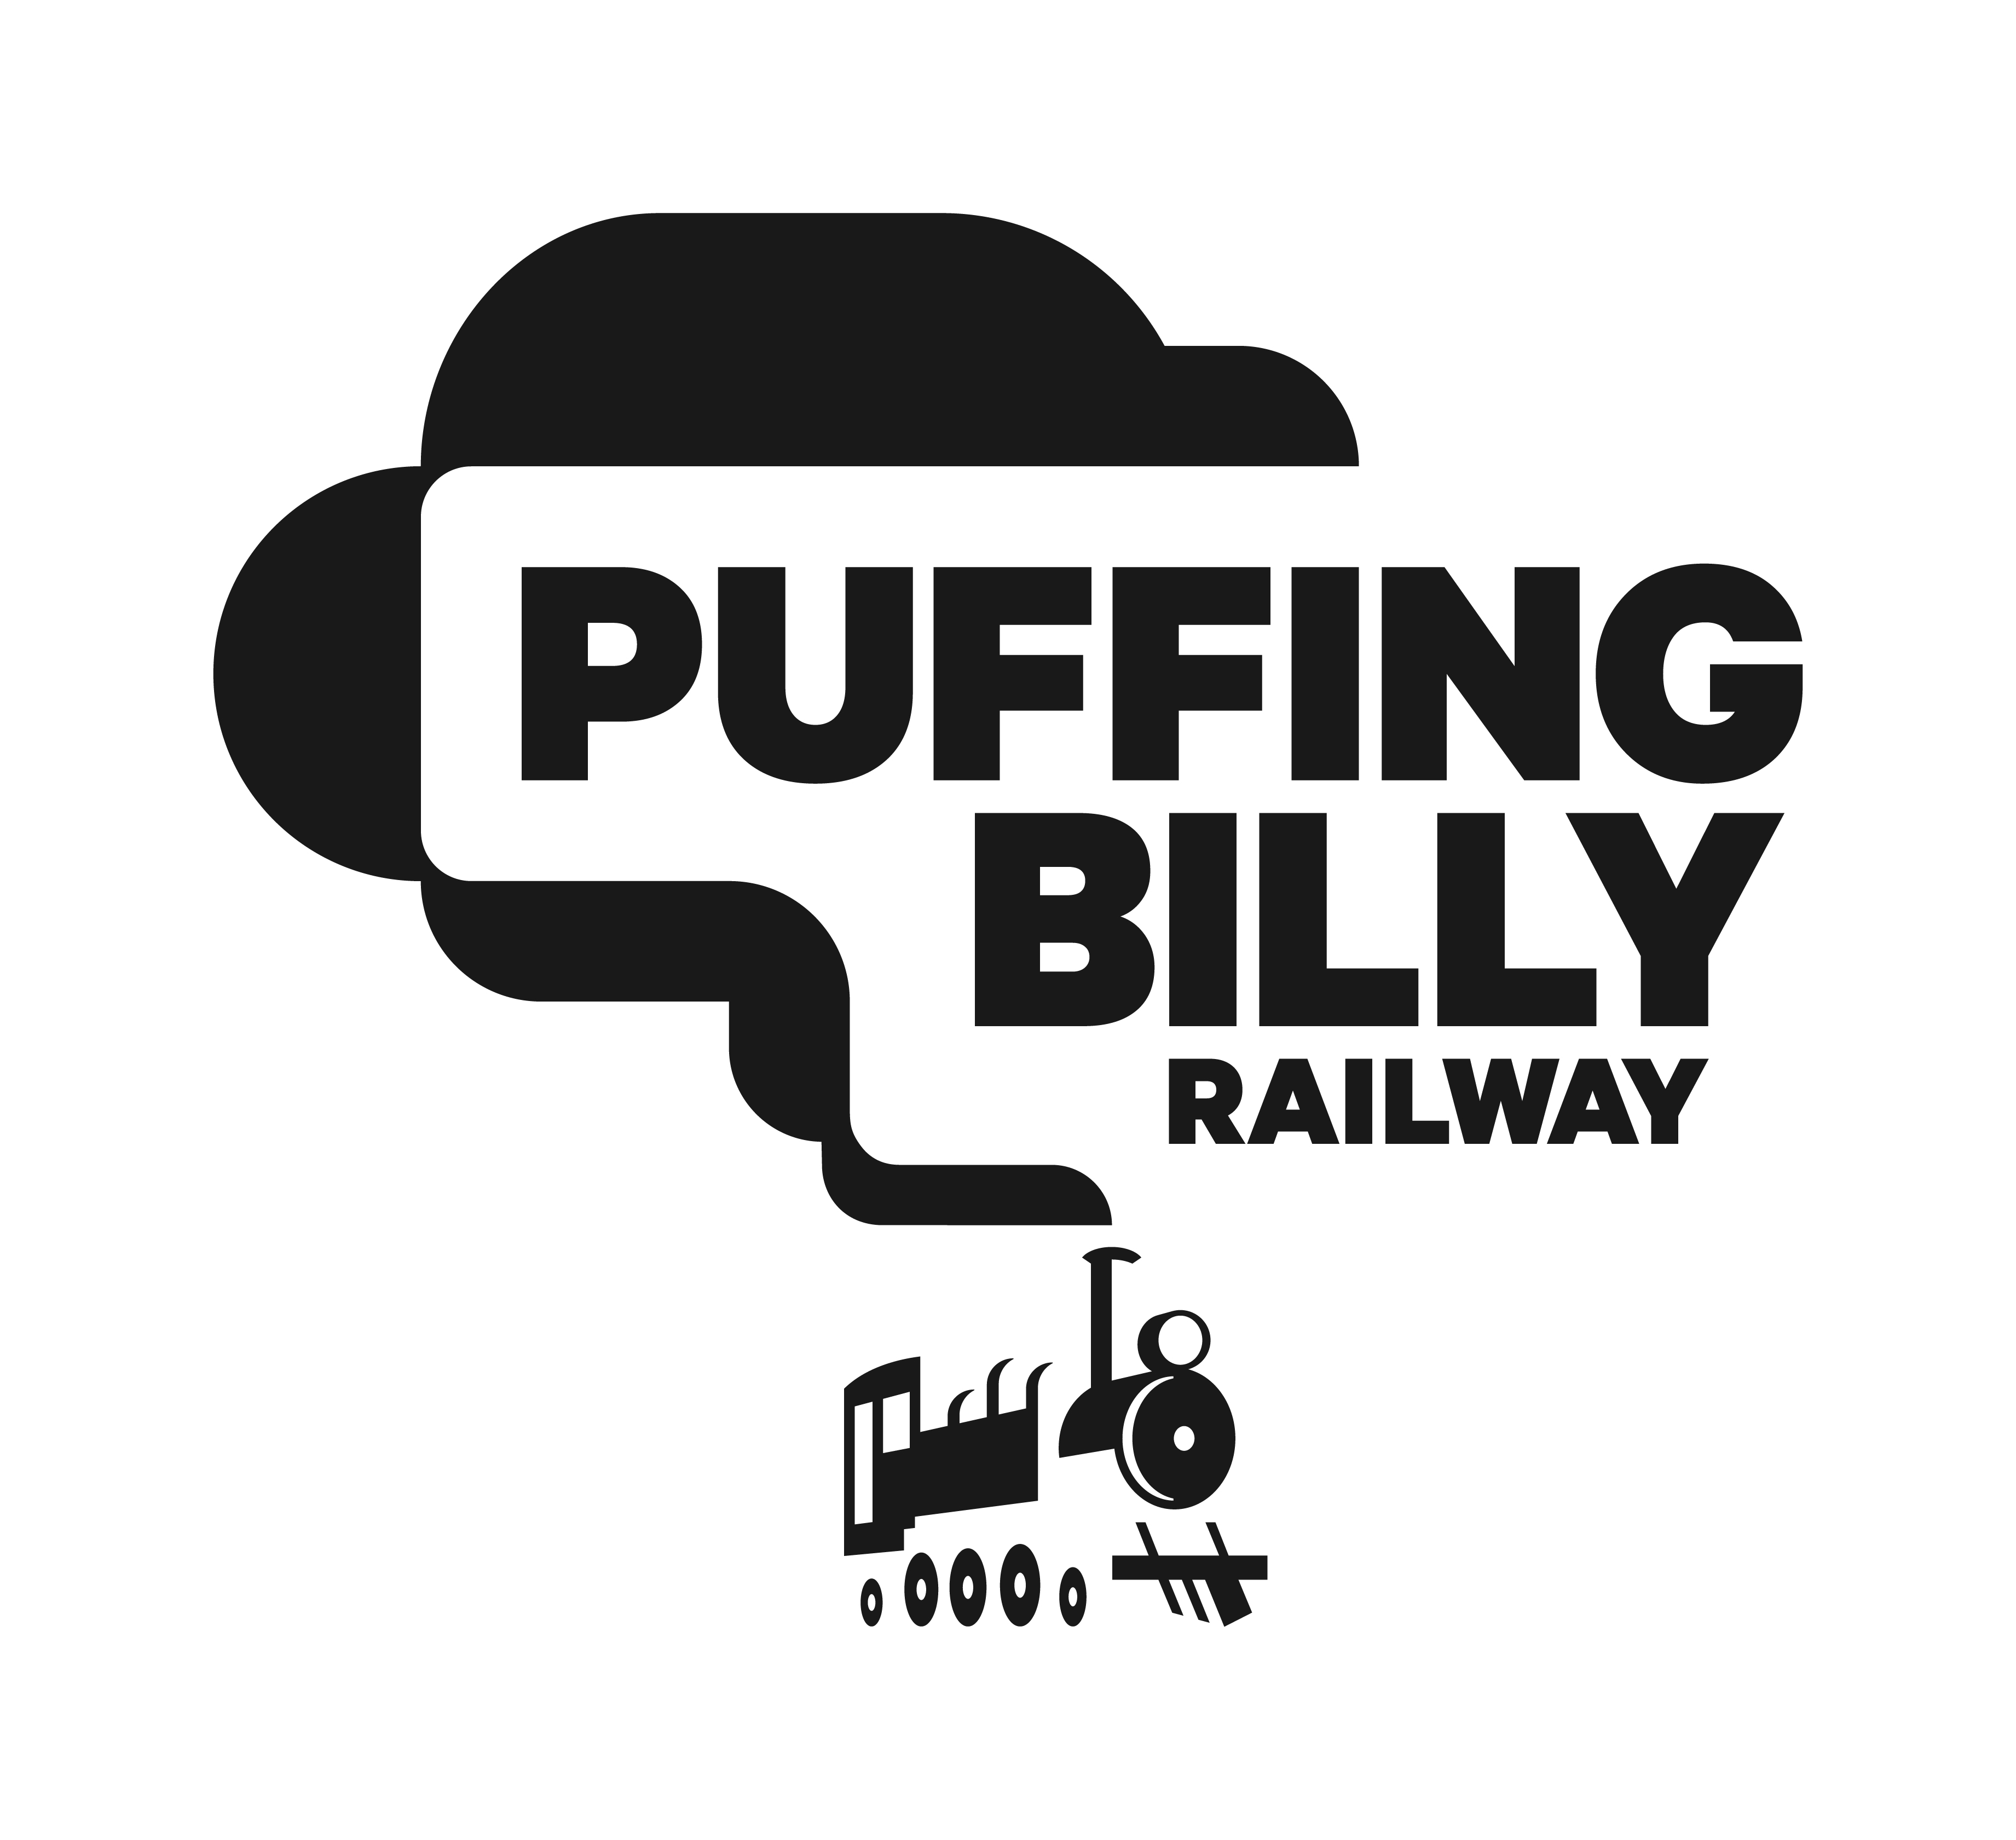 puffing billy tickets - actualidadcuba.com.